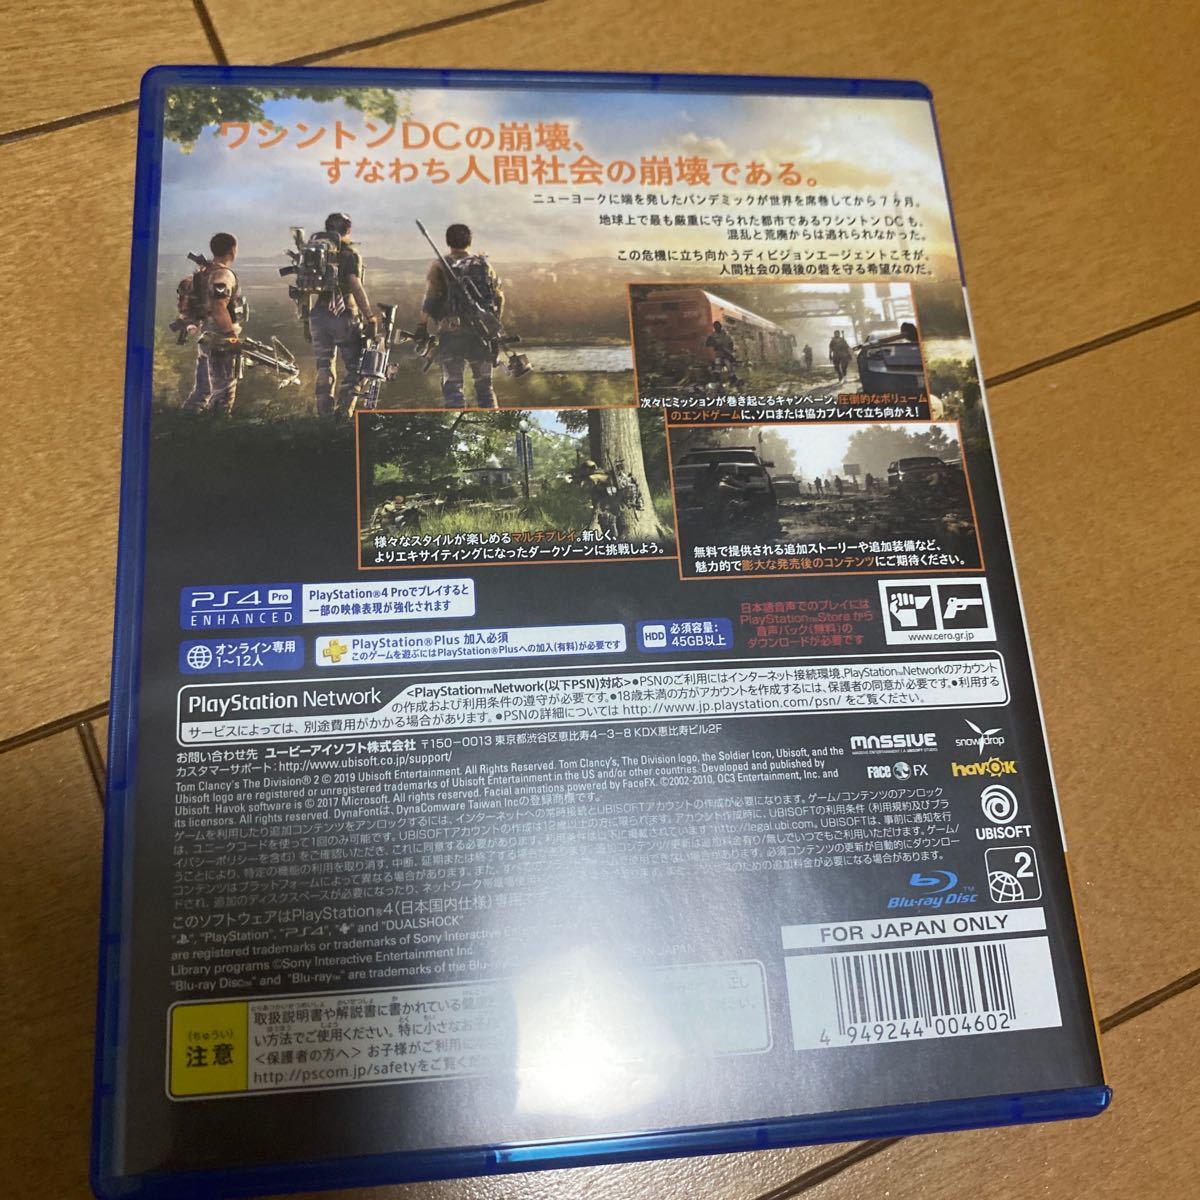 THE DIVISION2 ディビジョン2 PS4ソフト